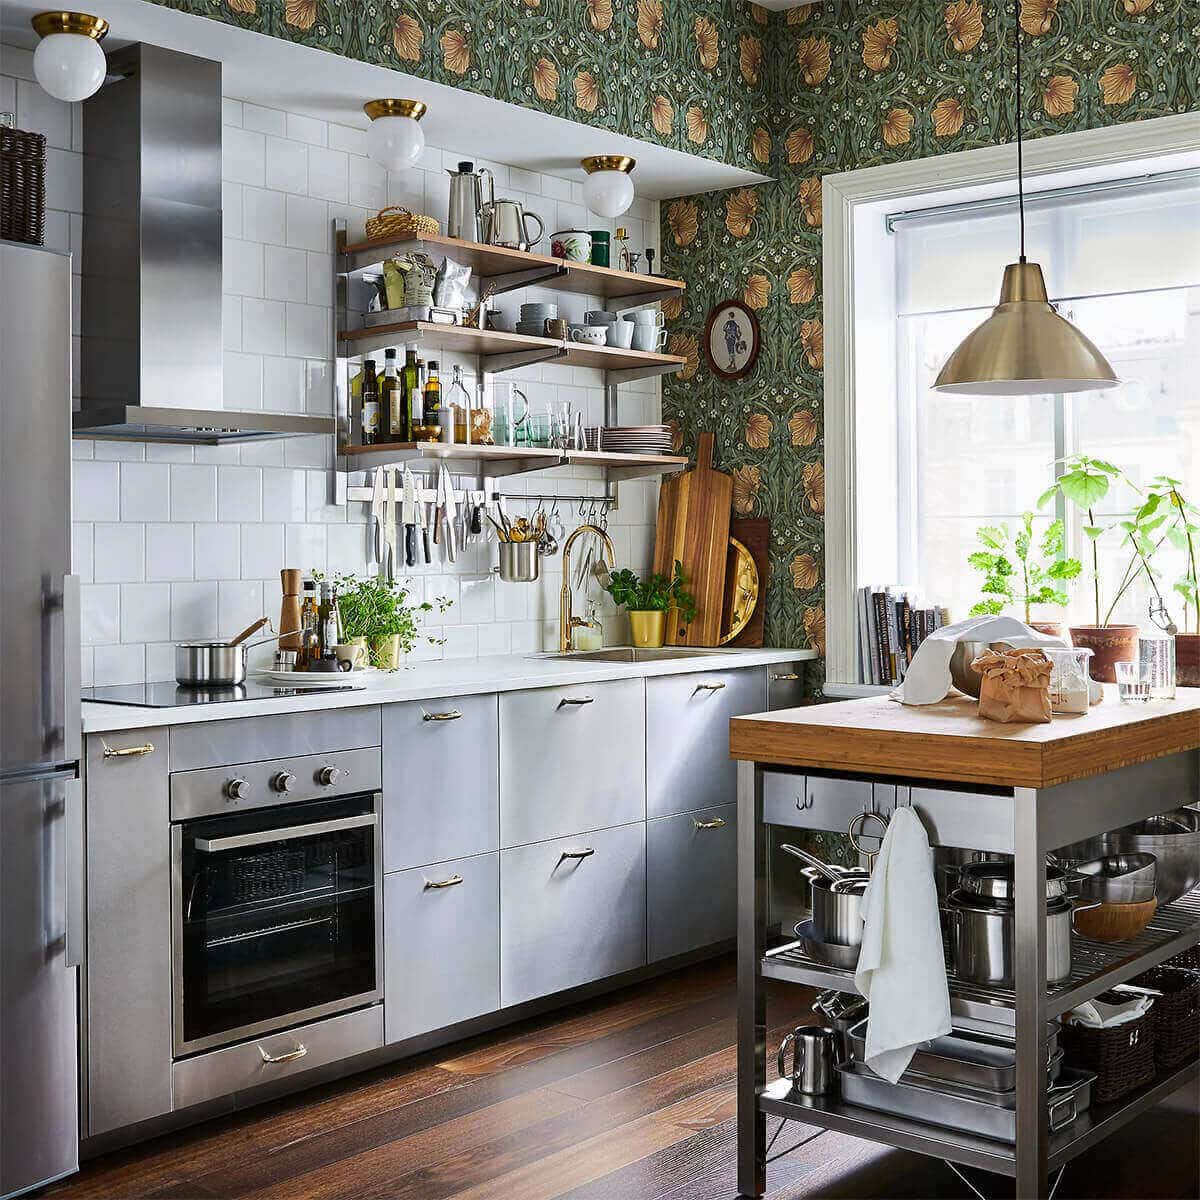 Decorating a Small, Tiny Kitchen in a Small Apartment